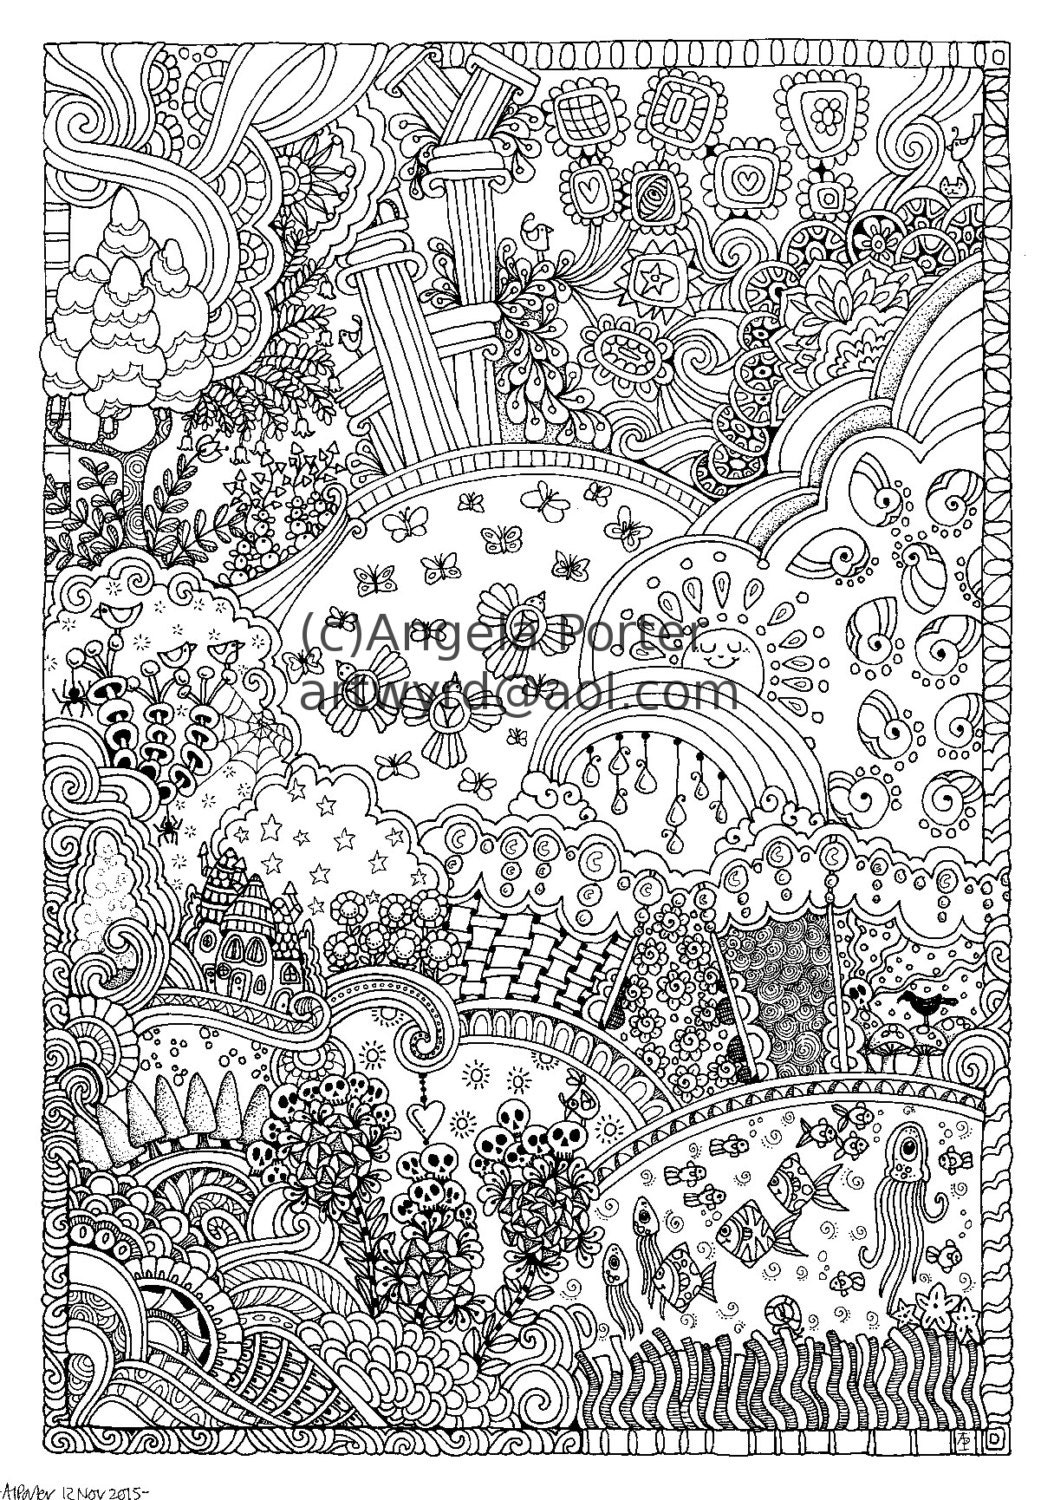 Alexandria Hillsen - Coloring pages – ArtisaStage